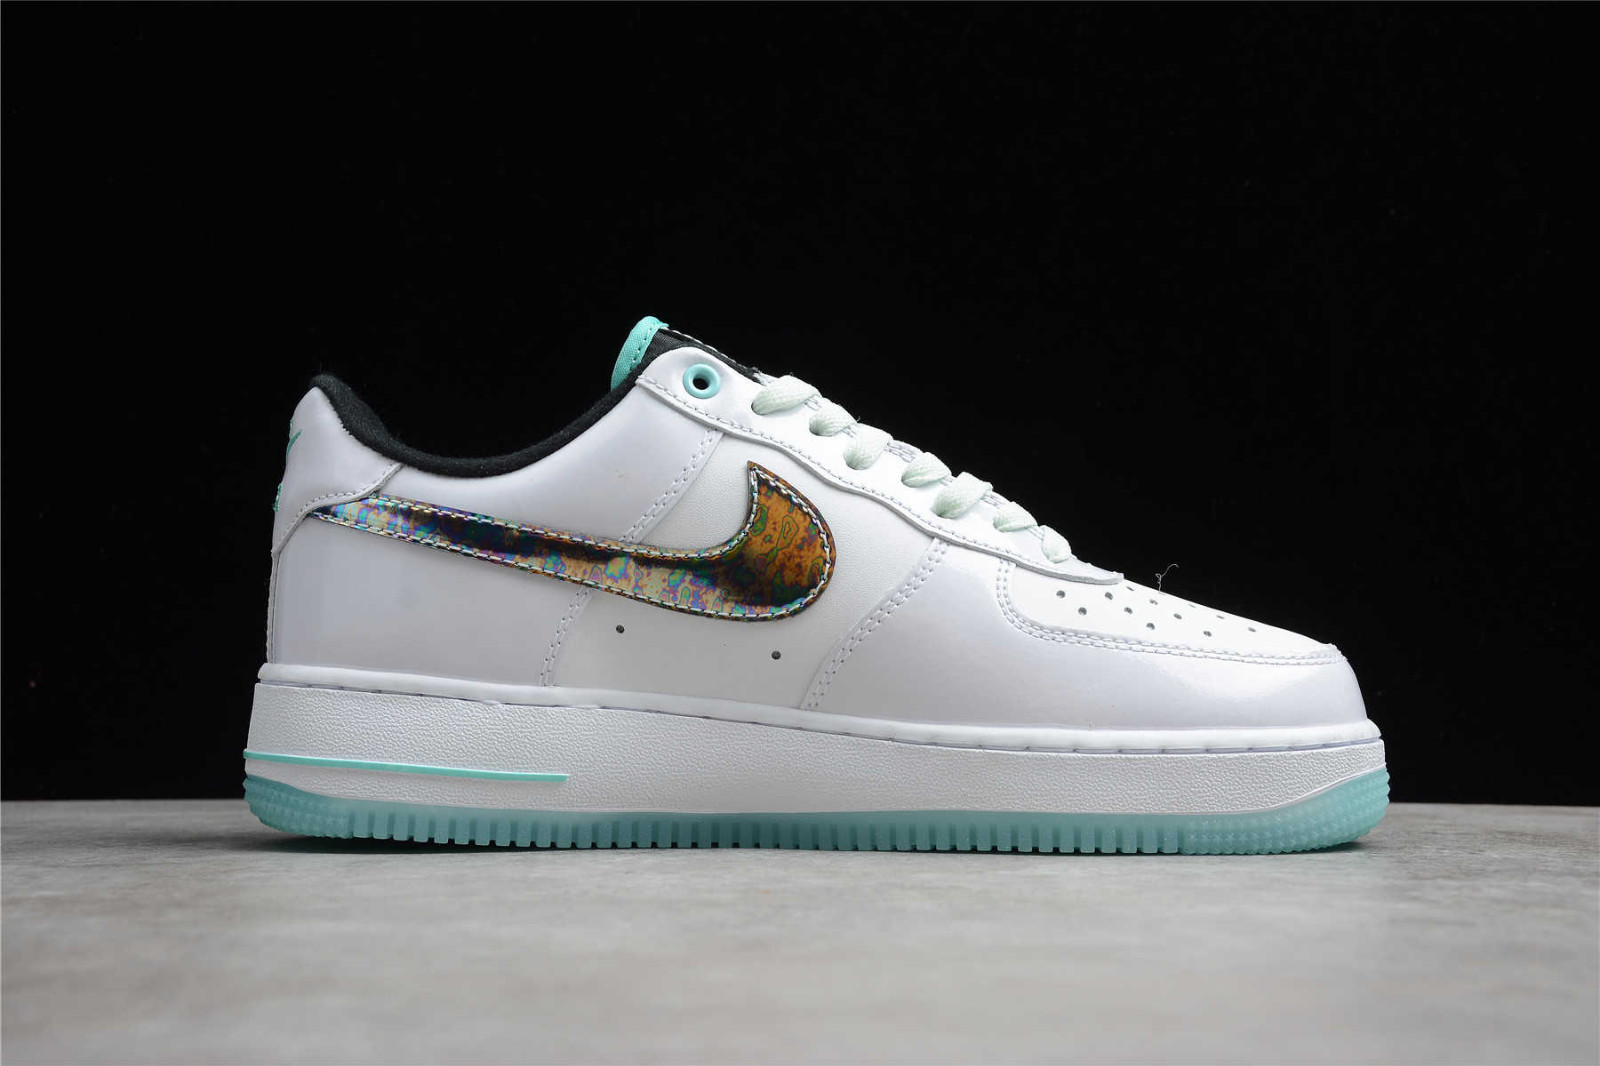 nike tiempo legacy 2 sizing chart jeans - StclaircomoShops - 100 - Nike Air Force 1 07 LV8 Abalone White Barely Green Light Dew Tropical Twist DD9613